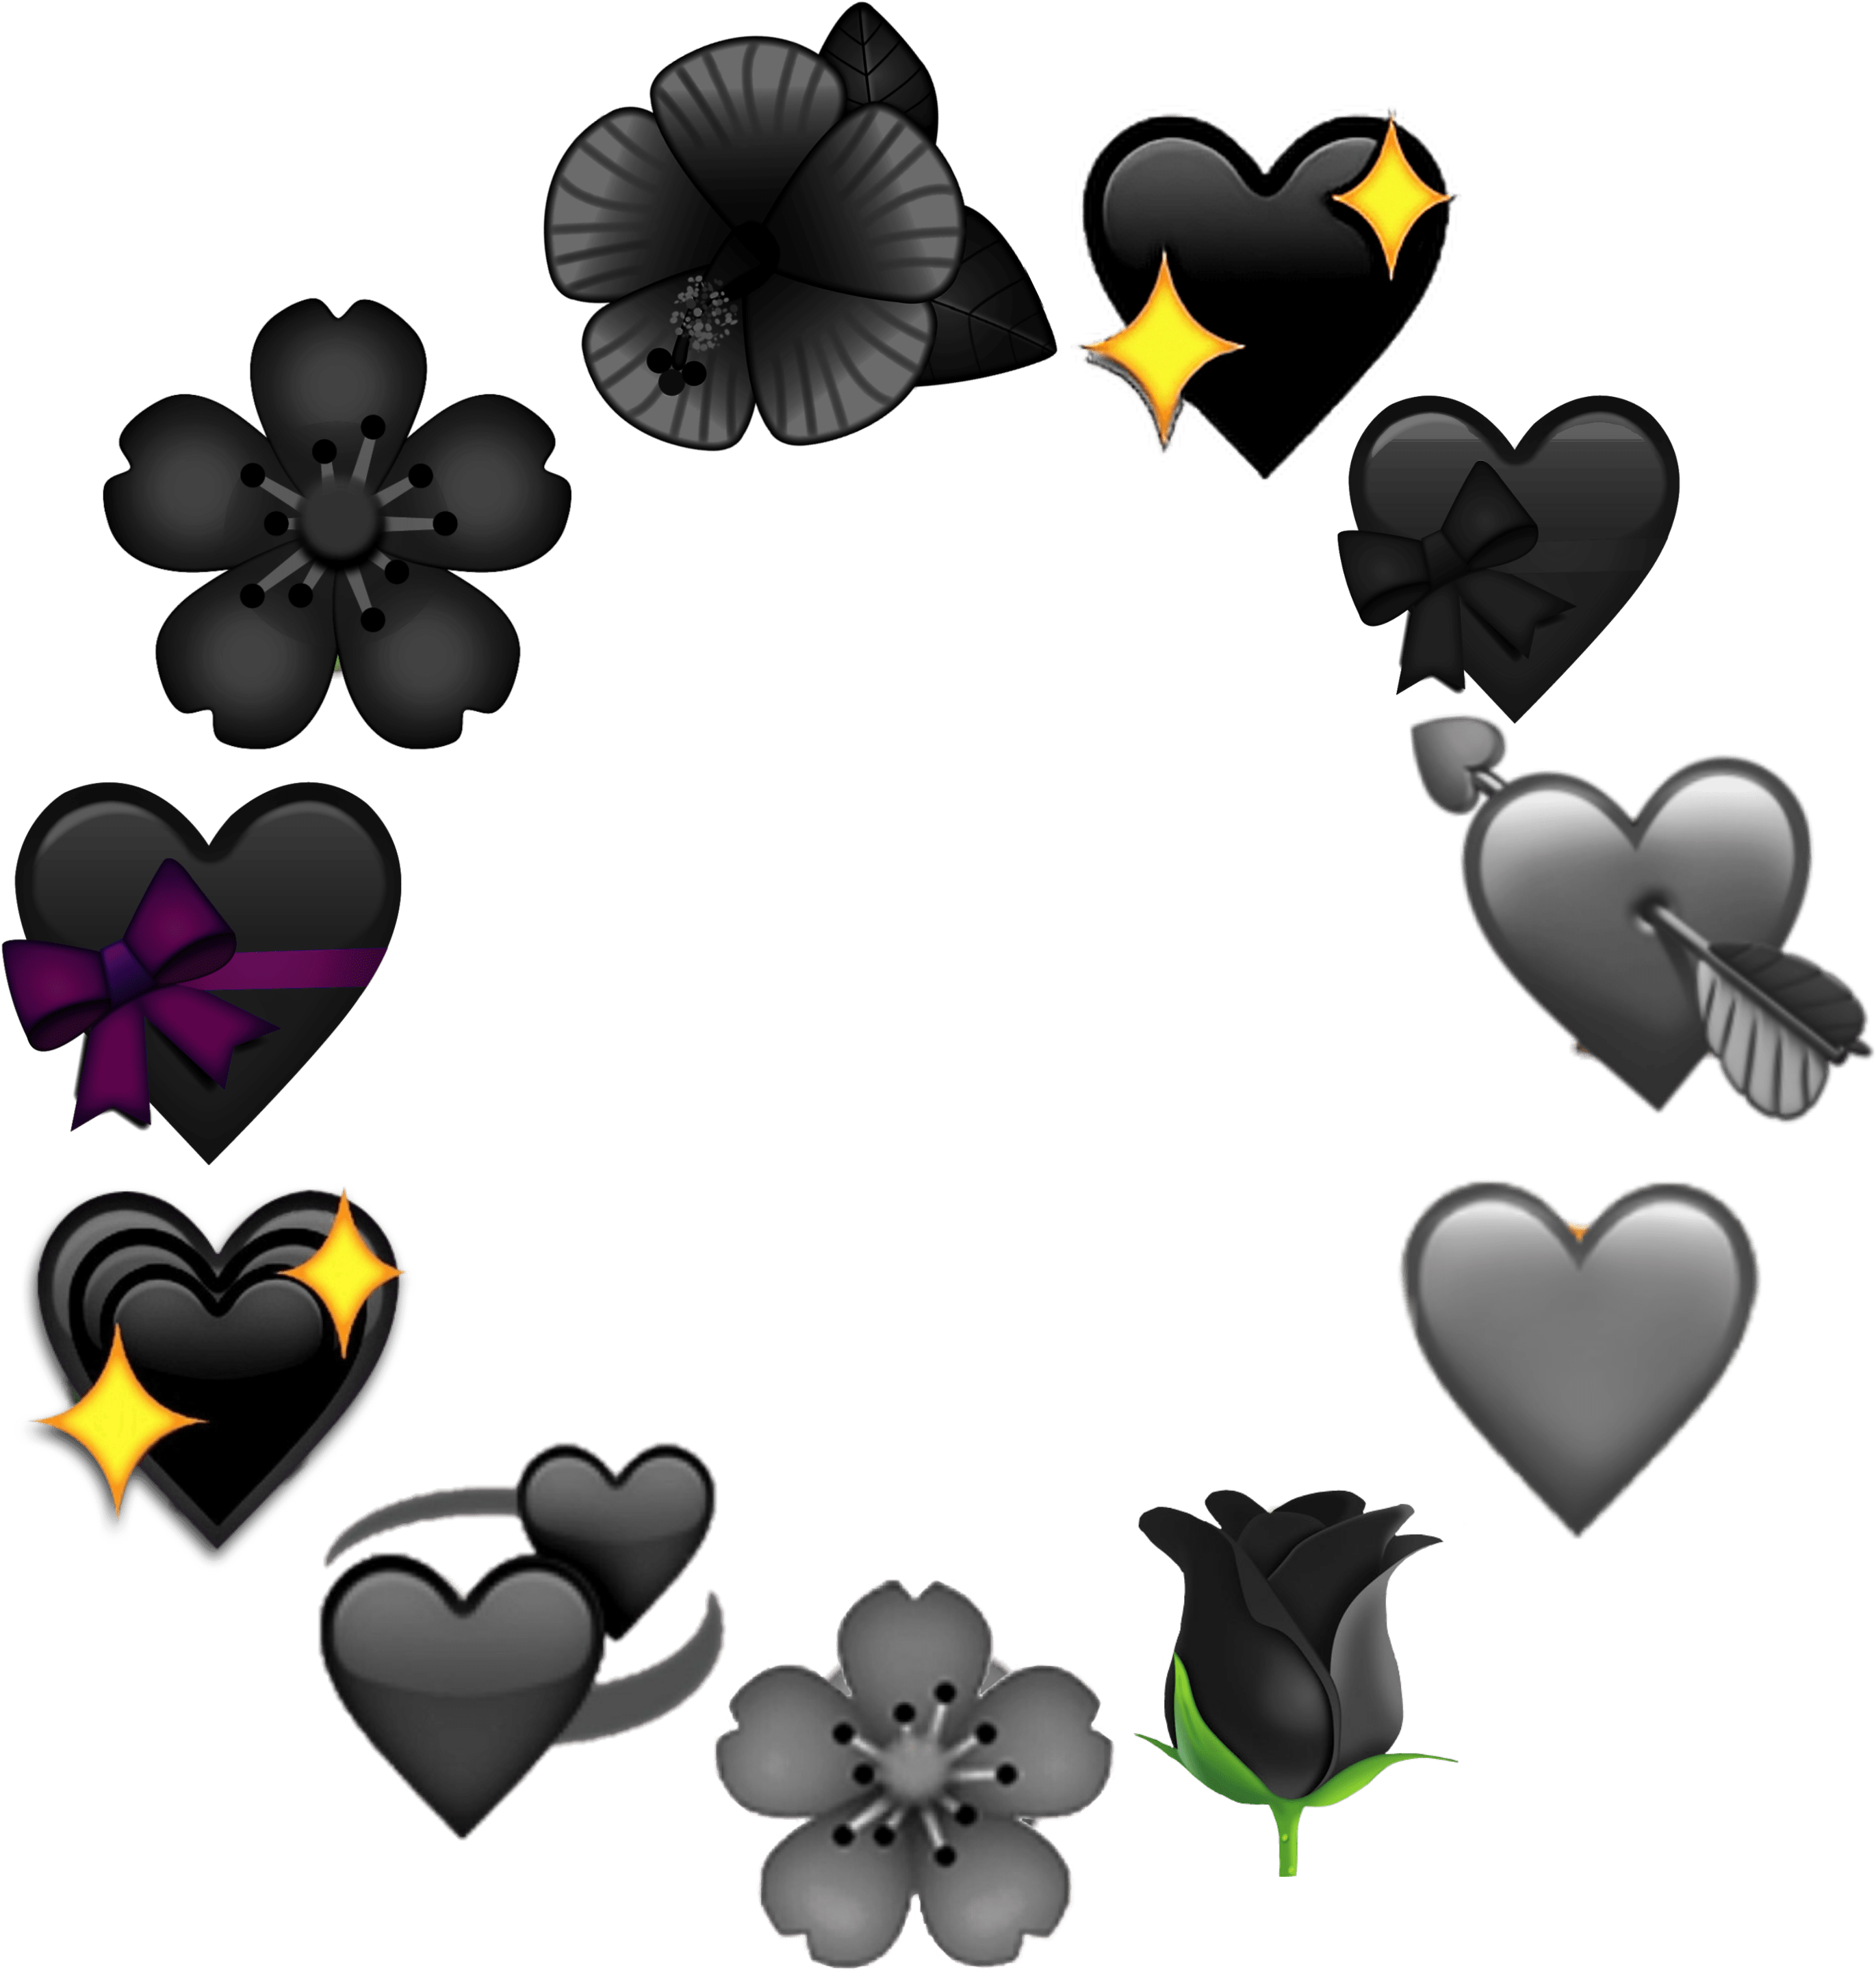 Assorted_ Black_ Heart_and_ Flower_ Emojis PNG image